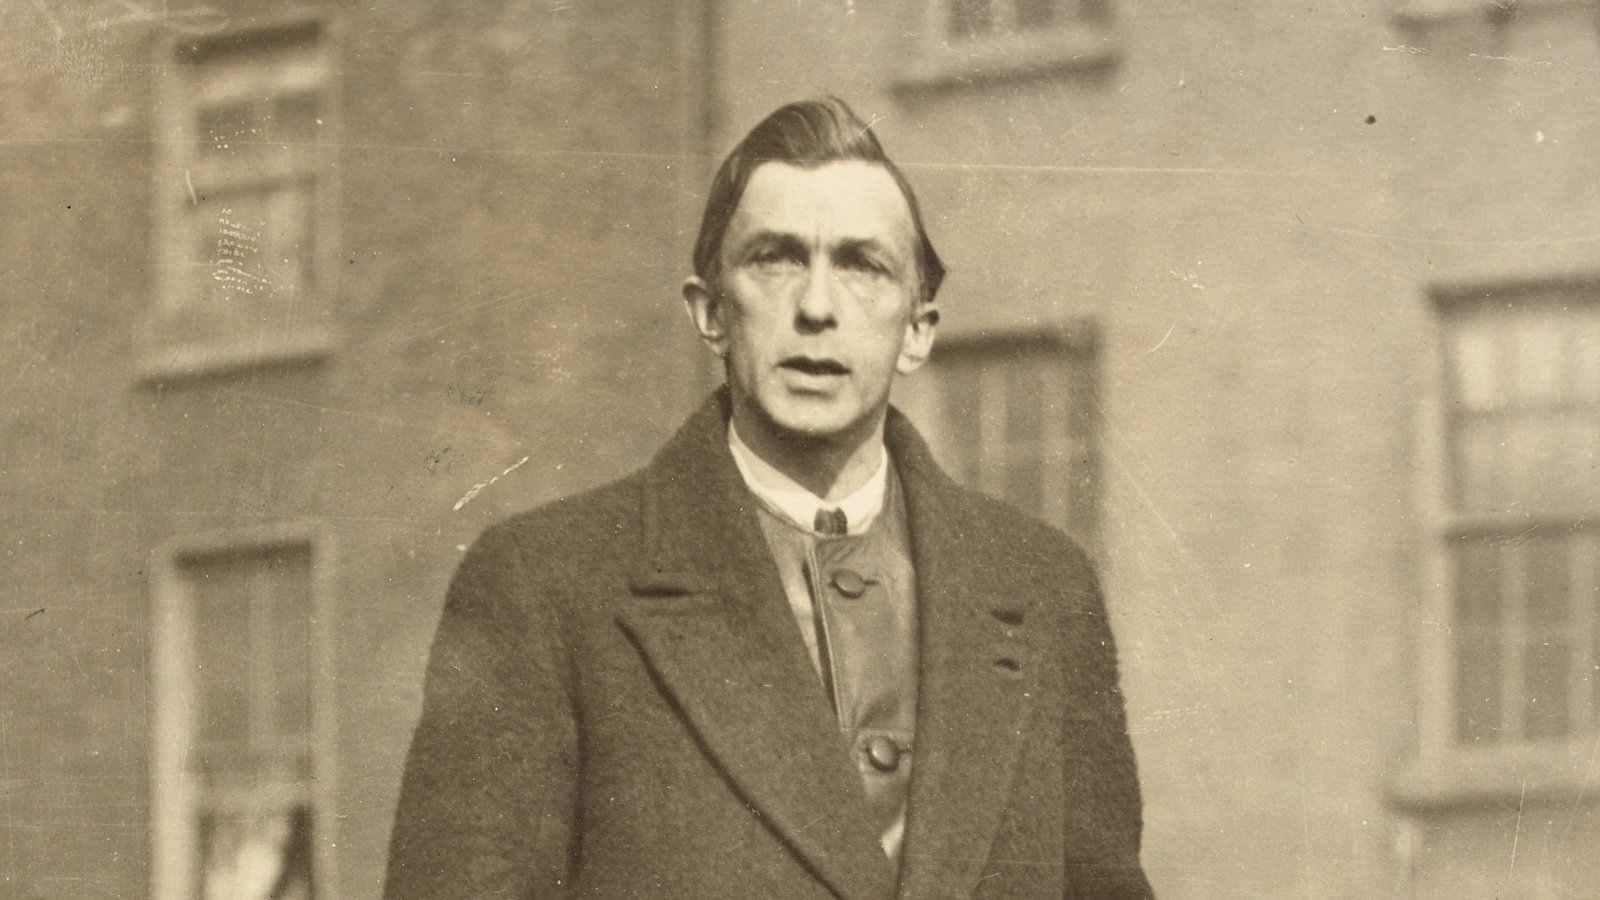 Image - Rory O'Connor, seen here just a few months before the occupation of the Four Courts. Image courtesy of the National Library of Ireland